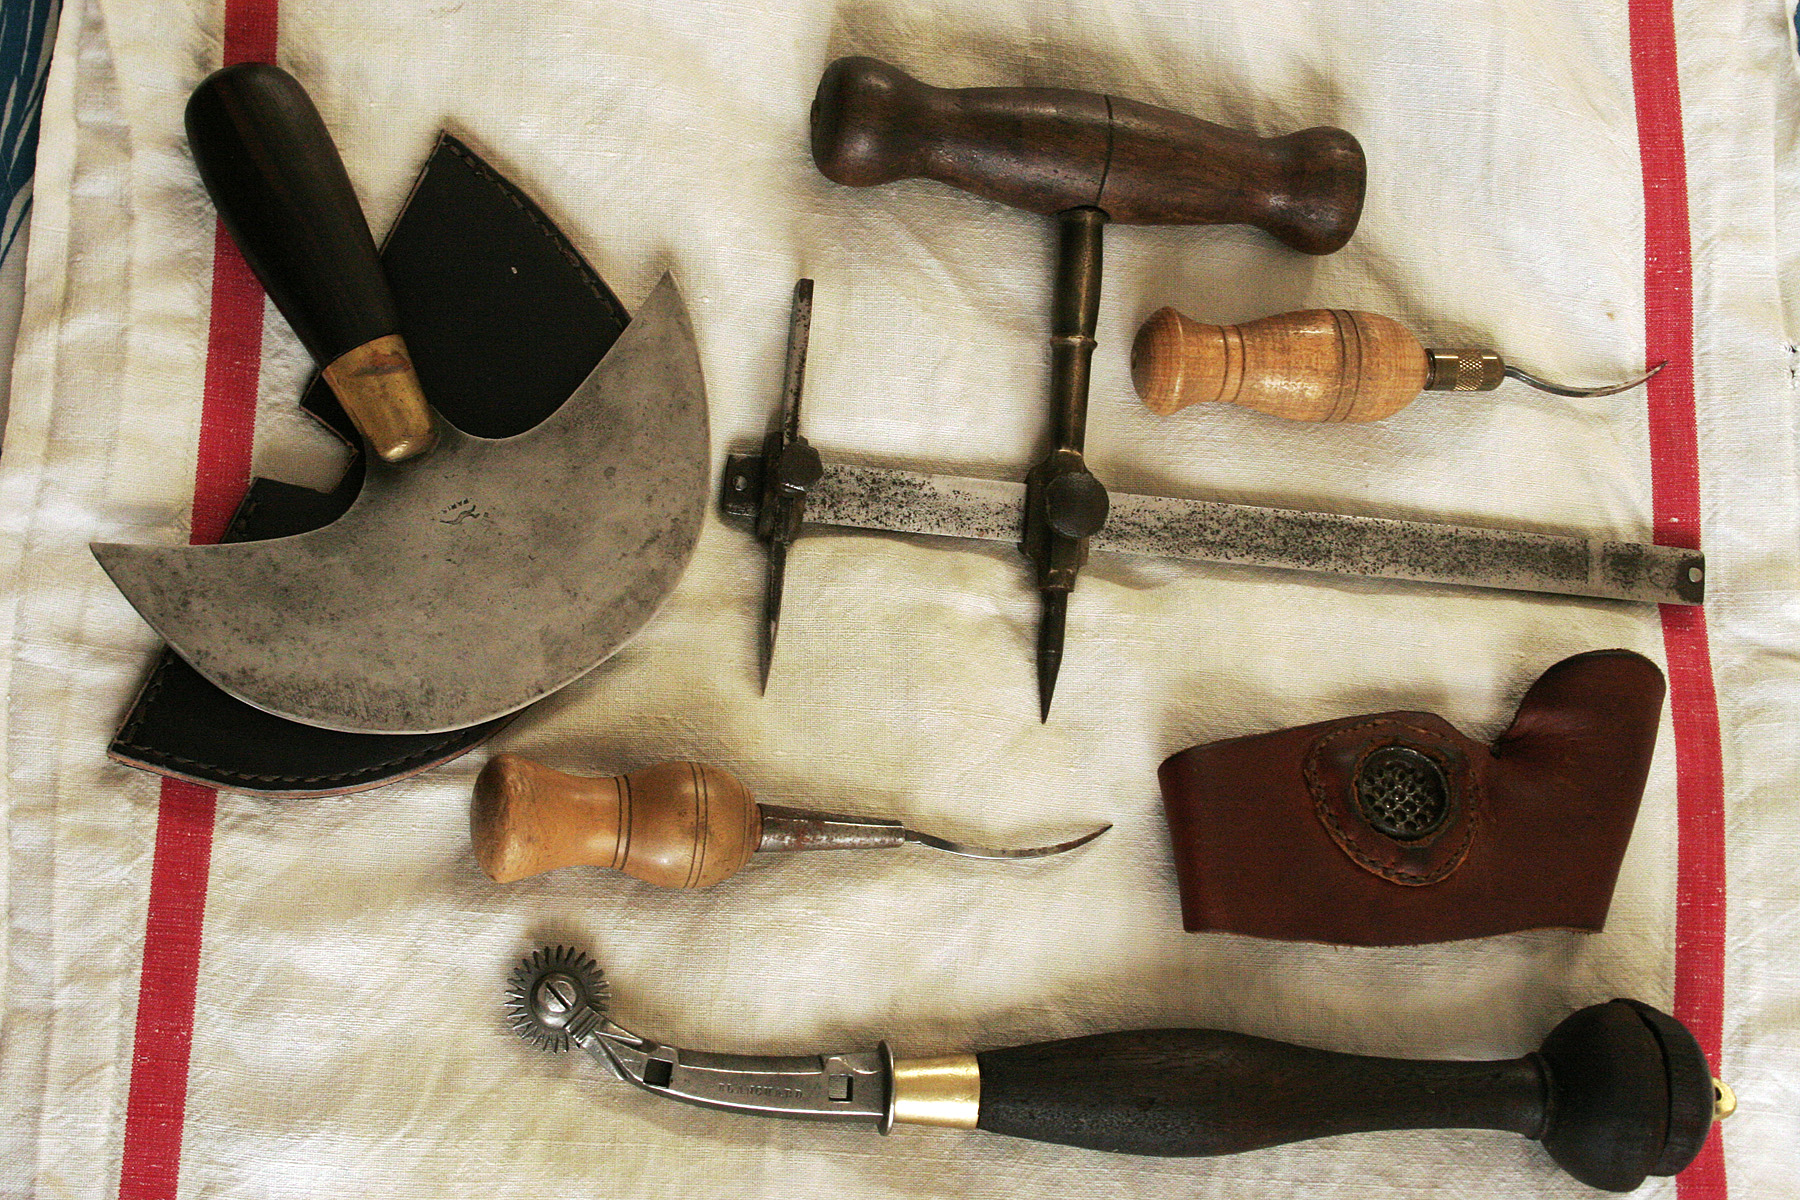 My collection of old leather tools grows. by djorll on DeviantArt